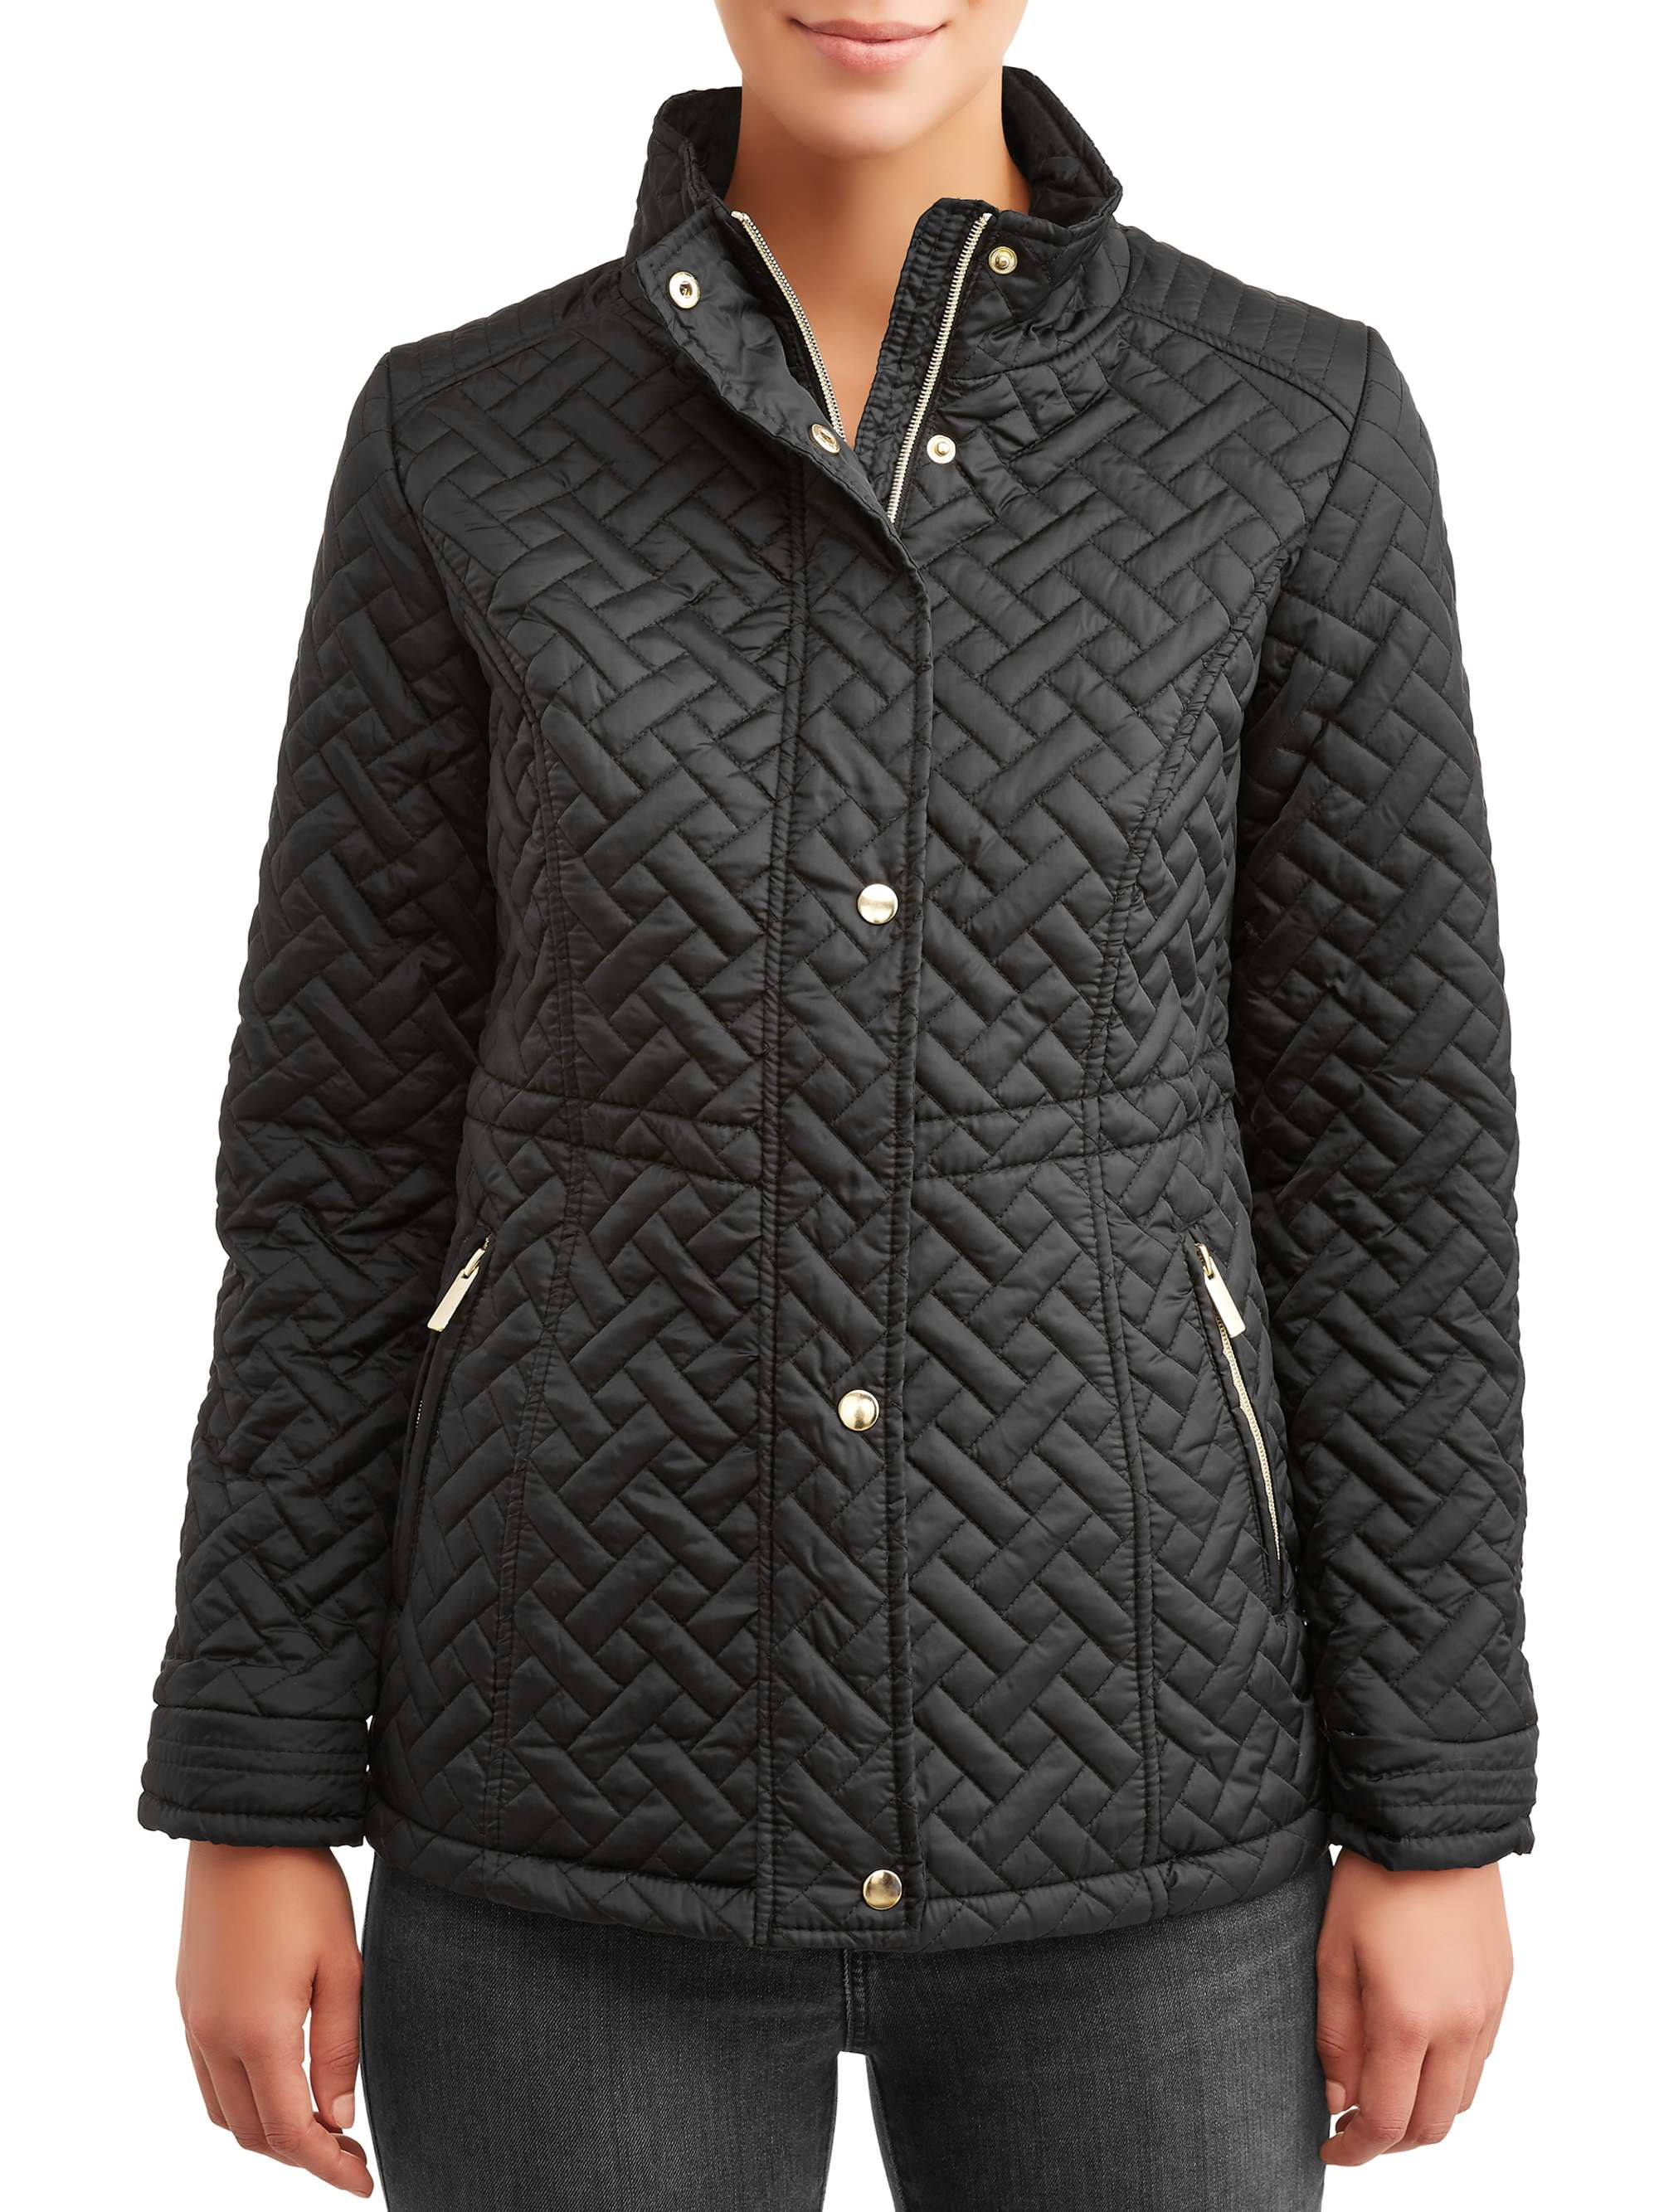 Big Chill Women's Basketweave Quilted Anorak Jacket Black SIZE L --CQ10 ...